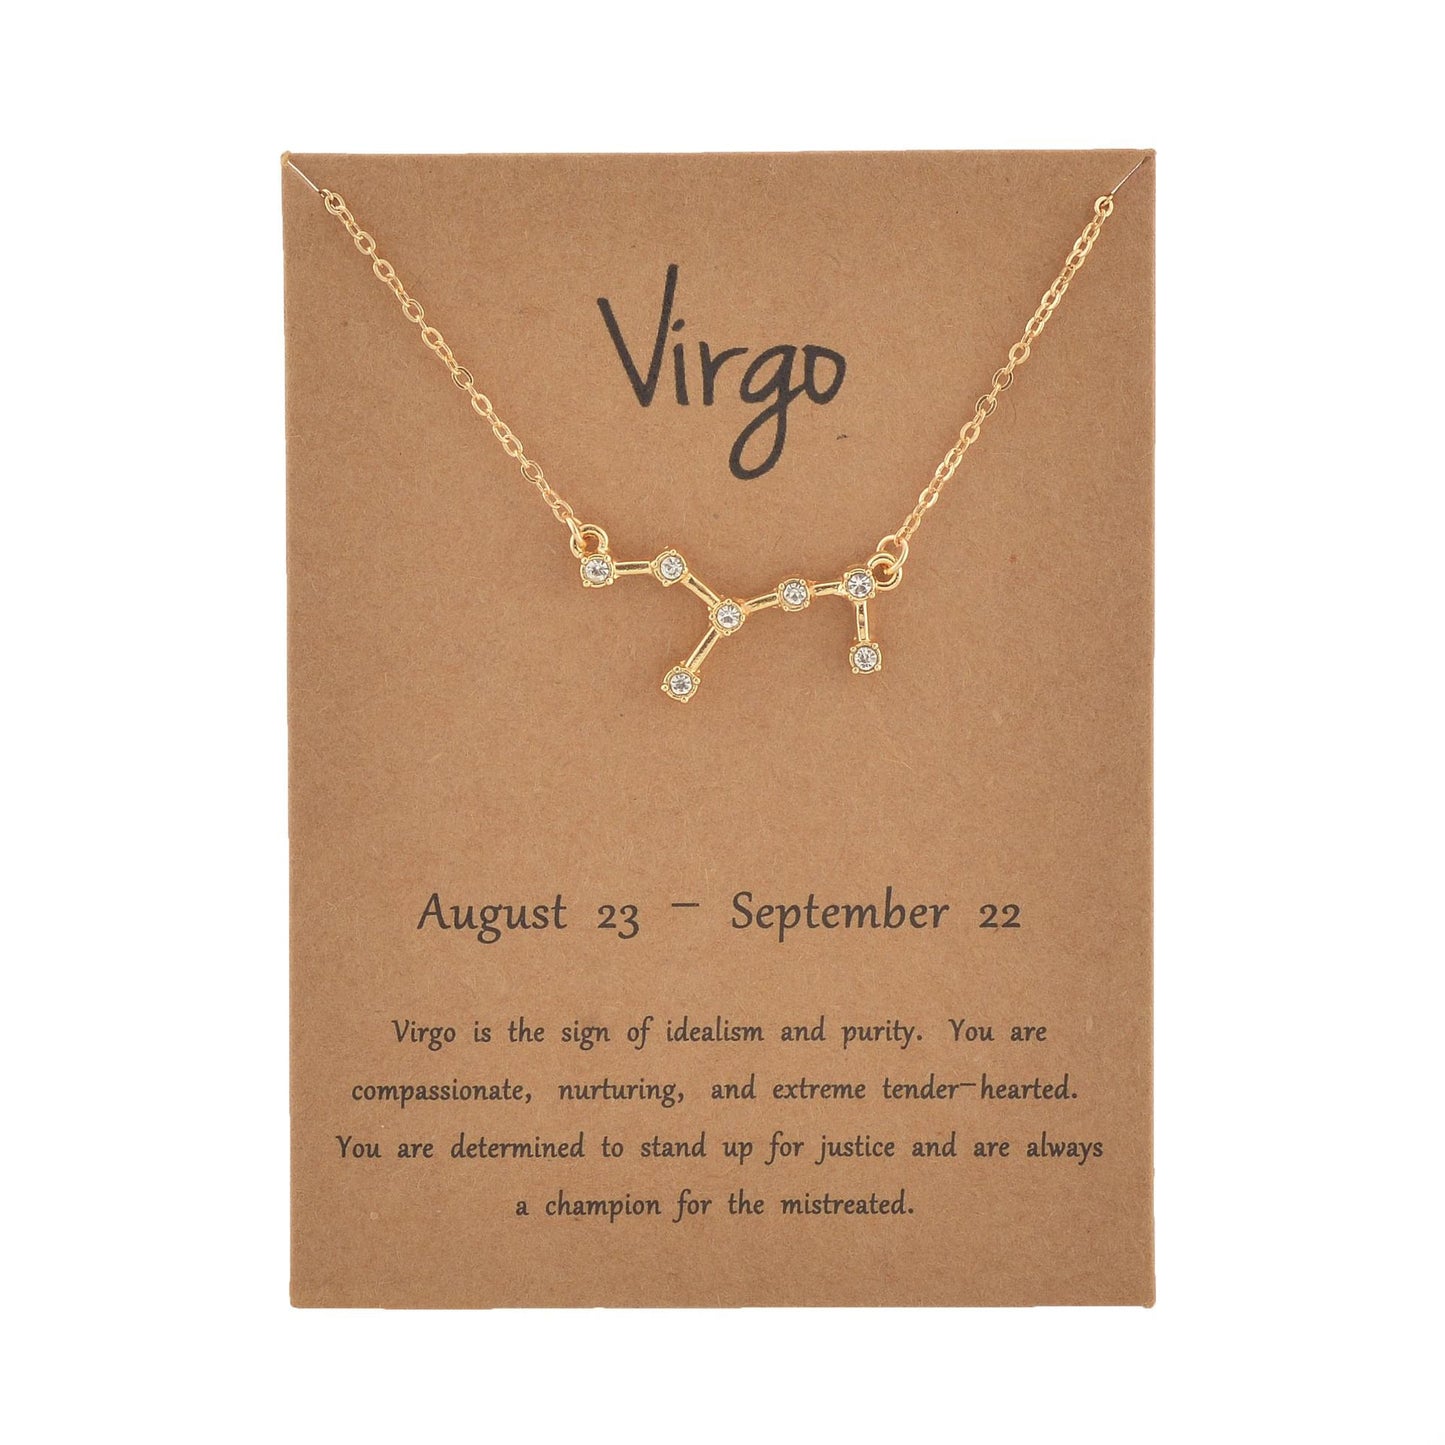 Female Elegant Star Zodiac Sign 12 Constellation Necklaces Pendant Gold Color Chain Choker Necklaces for Women Jewelry Cardboard